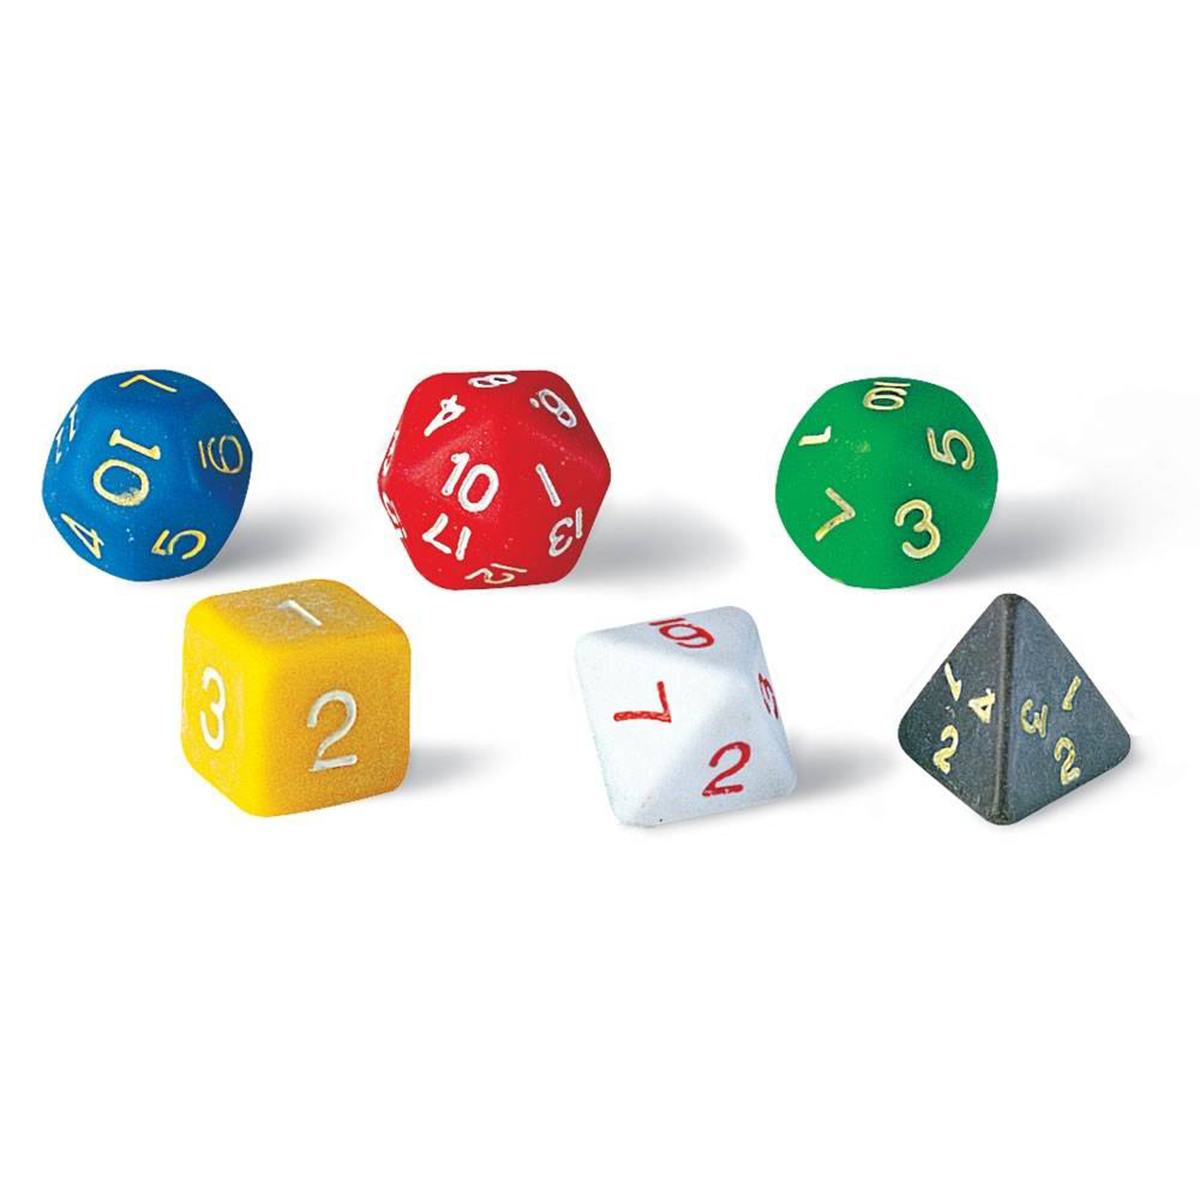  Polyhedral Dice Set of 6 